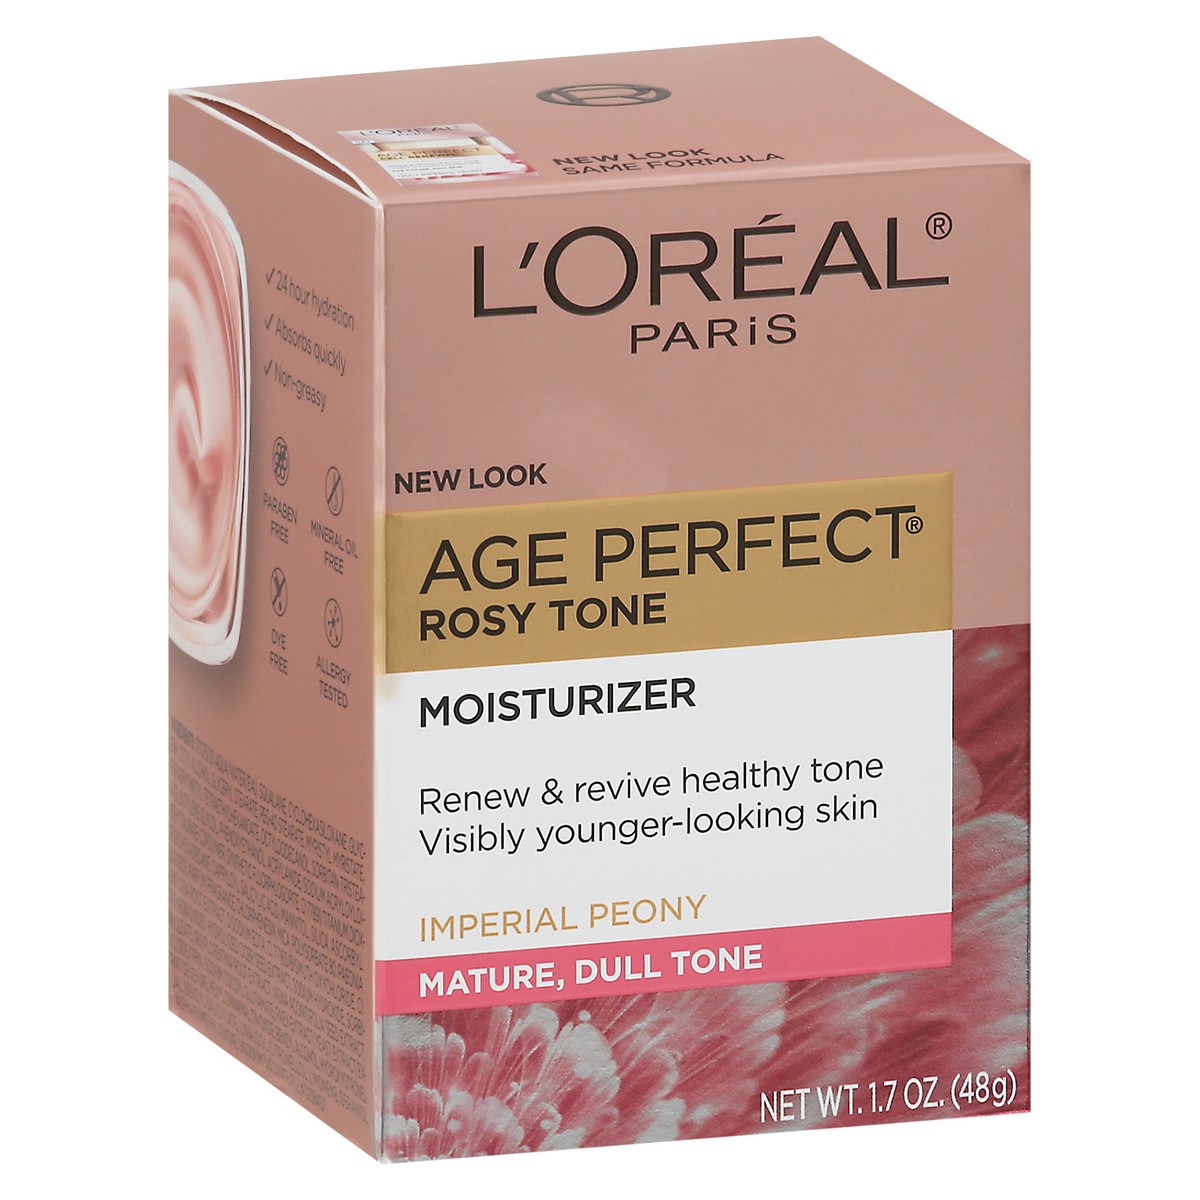 slide 13 of 13, Age Perfect Cell Renewal Rosy Tone Cream, 1.7 oz